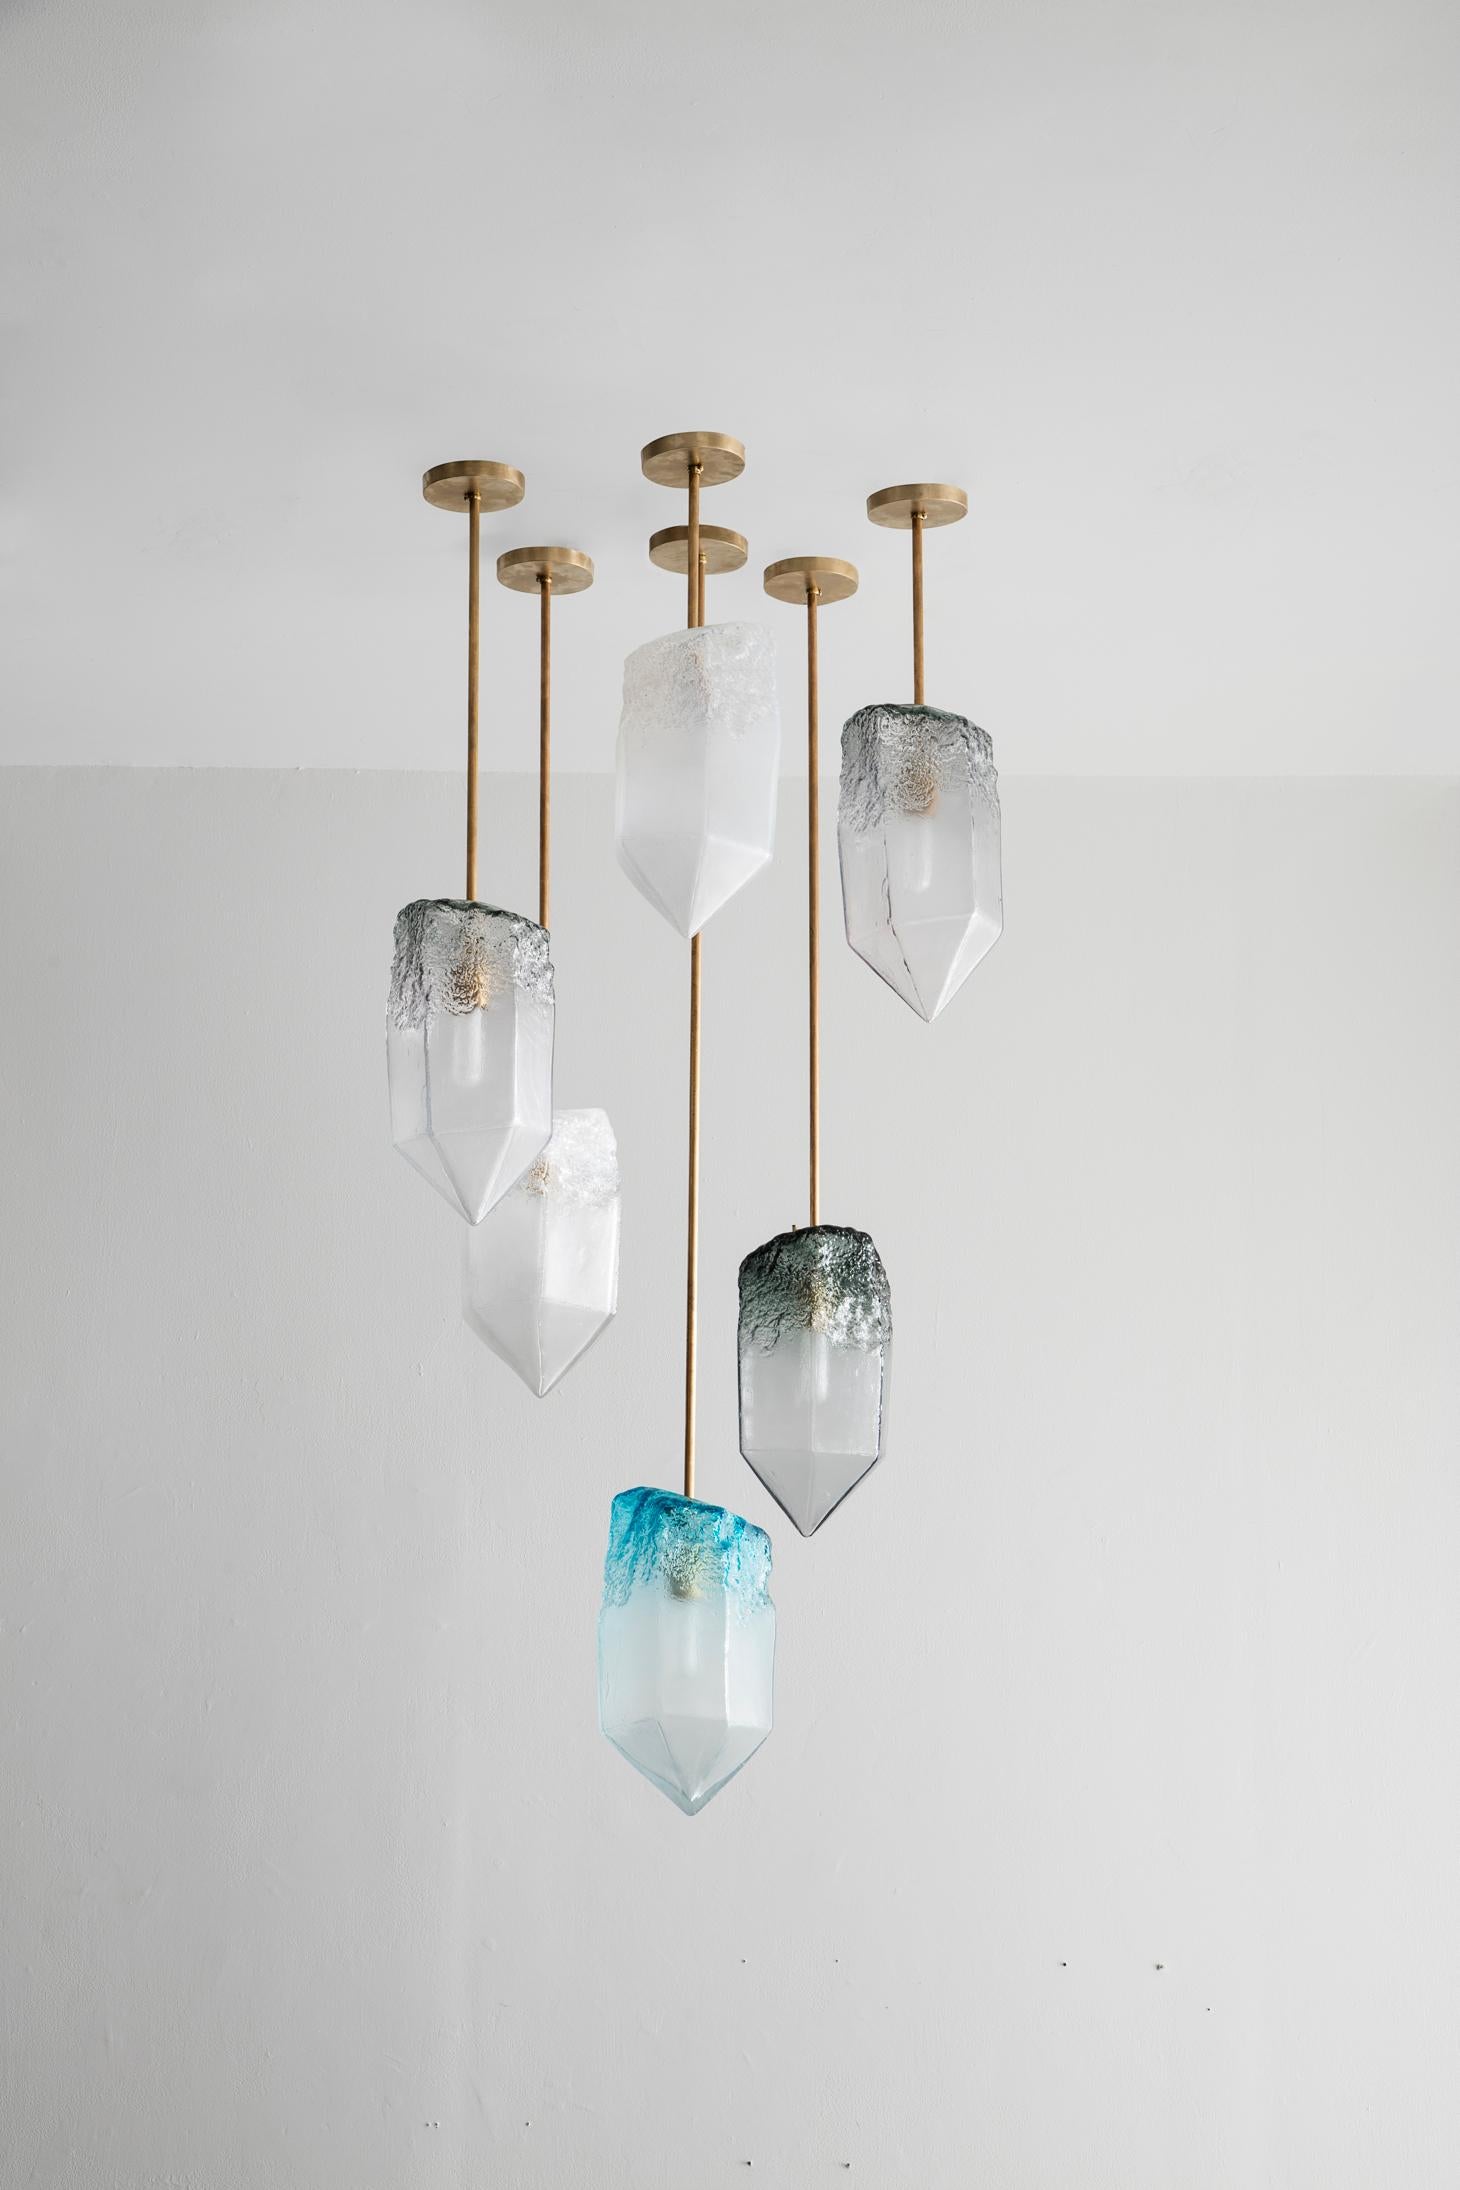 Modern Sculptural Pendant Light in Turquoise Glass by Jeff Zimmerman, 2016 For Sale